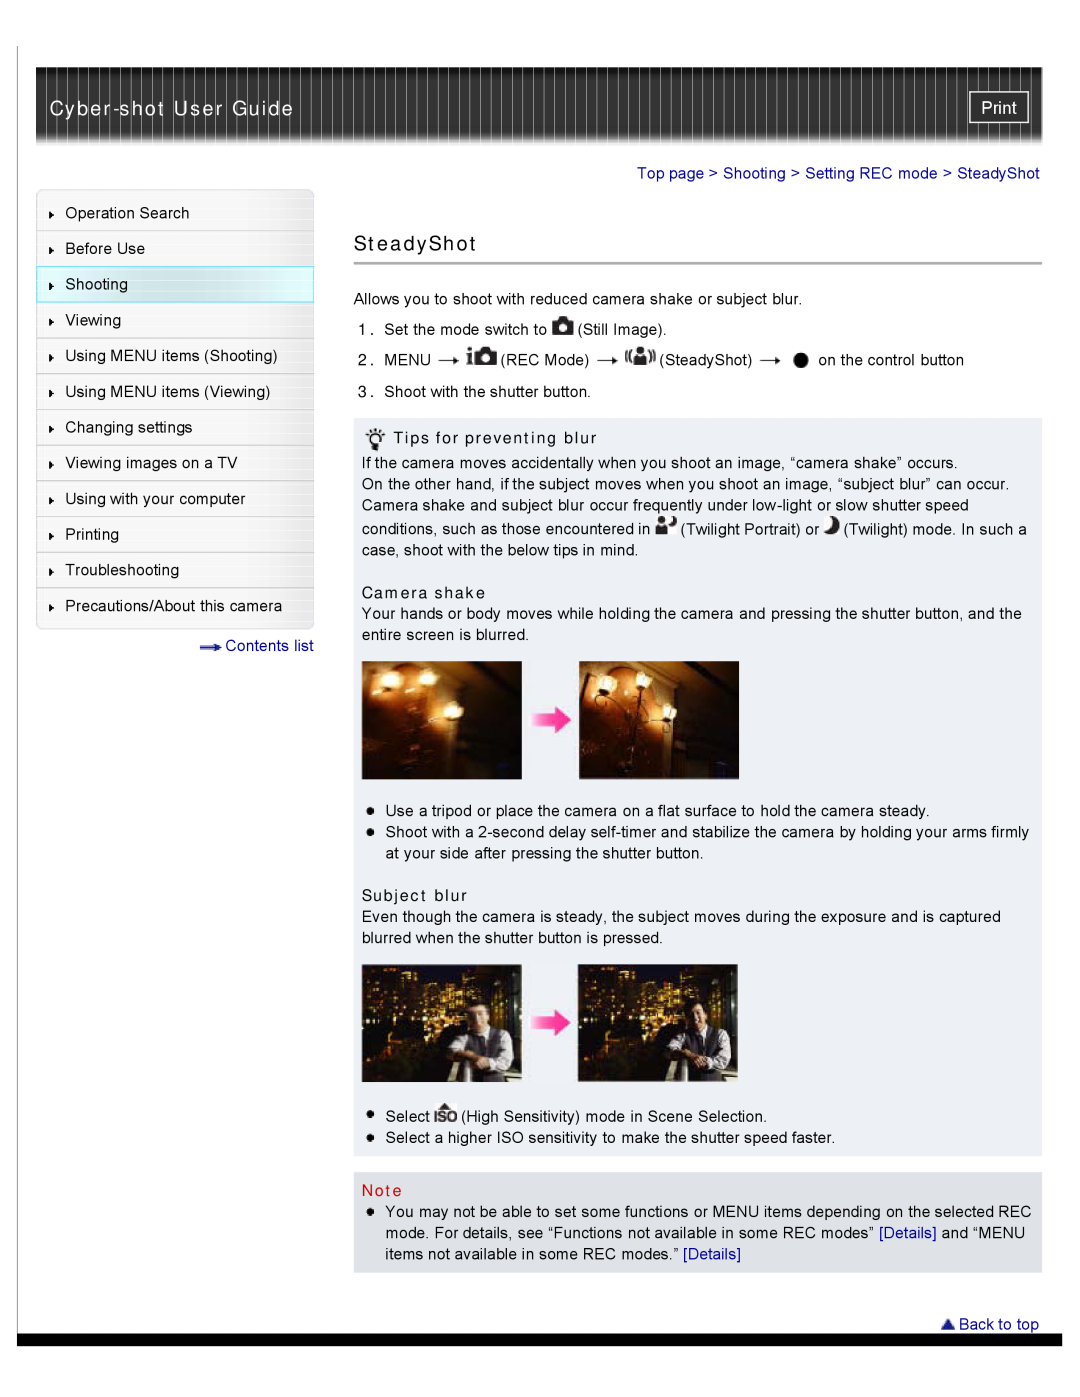 Sony W550 Cyber-shot User Guide, Print, Contents list, Top page Shooting Setting REC mode SteadyShot, Camera shake 